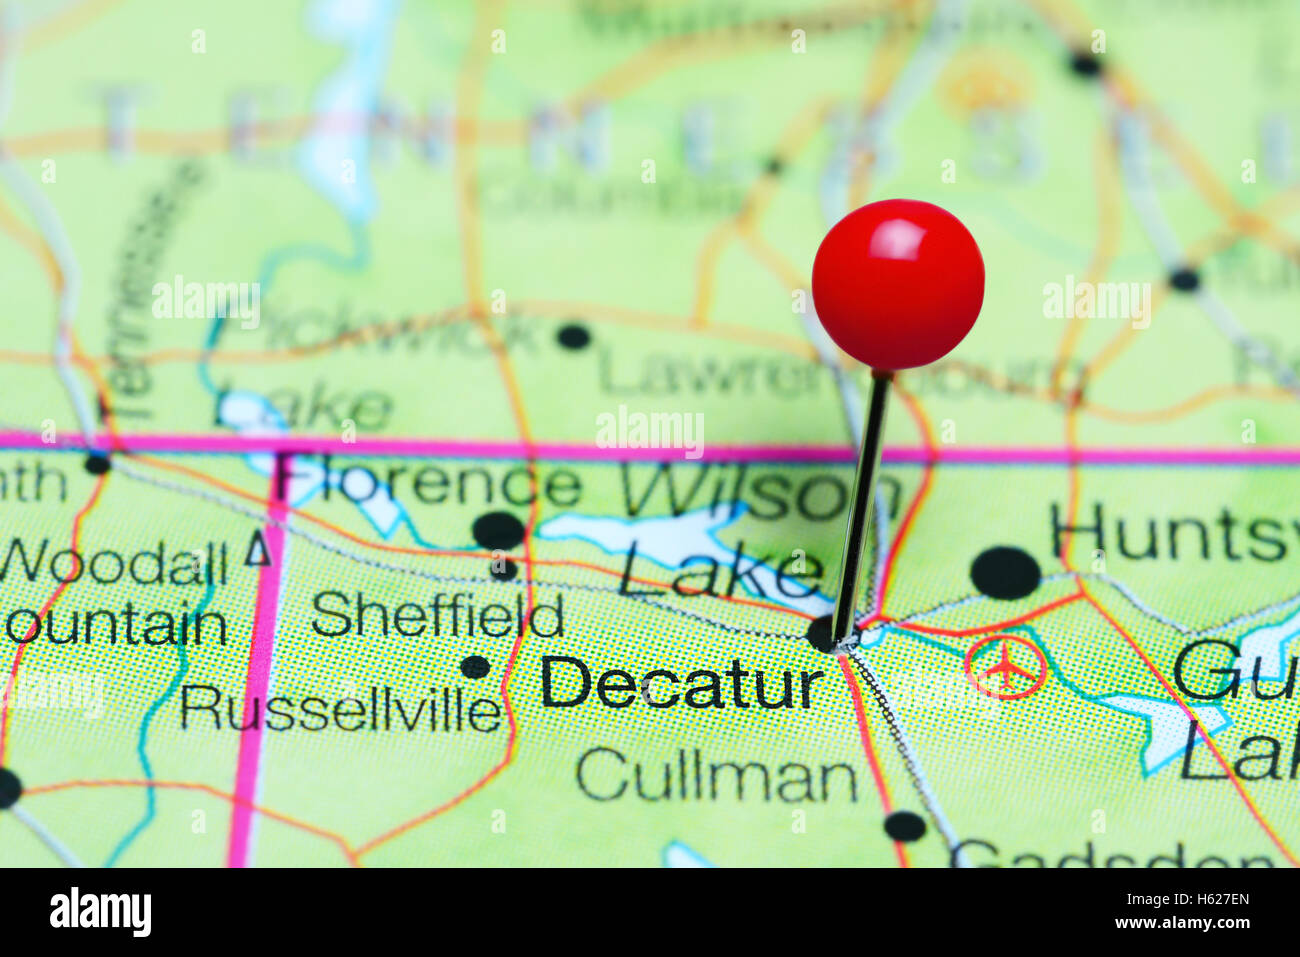 Decatur pinned on a map of Alabama, USA Stock Photo